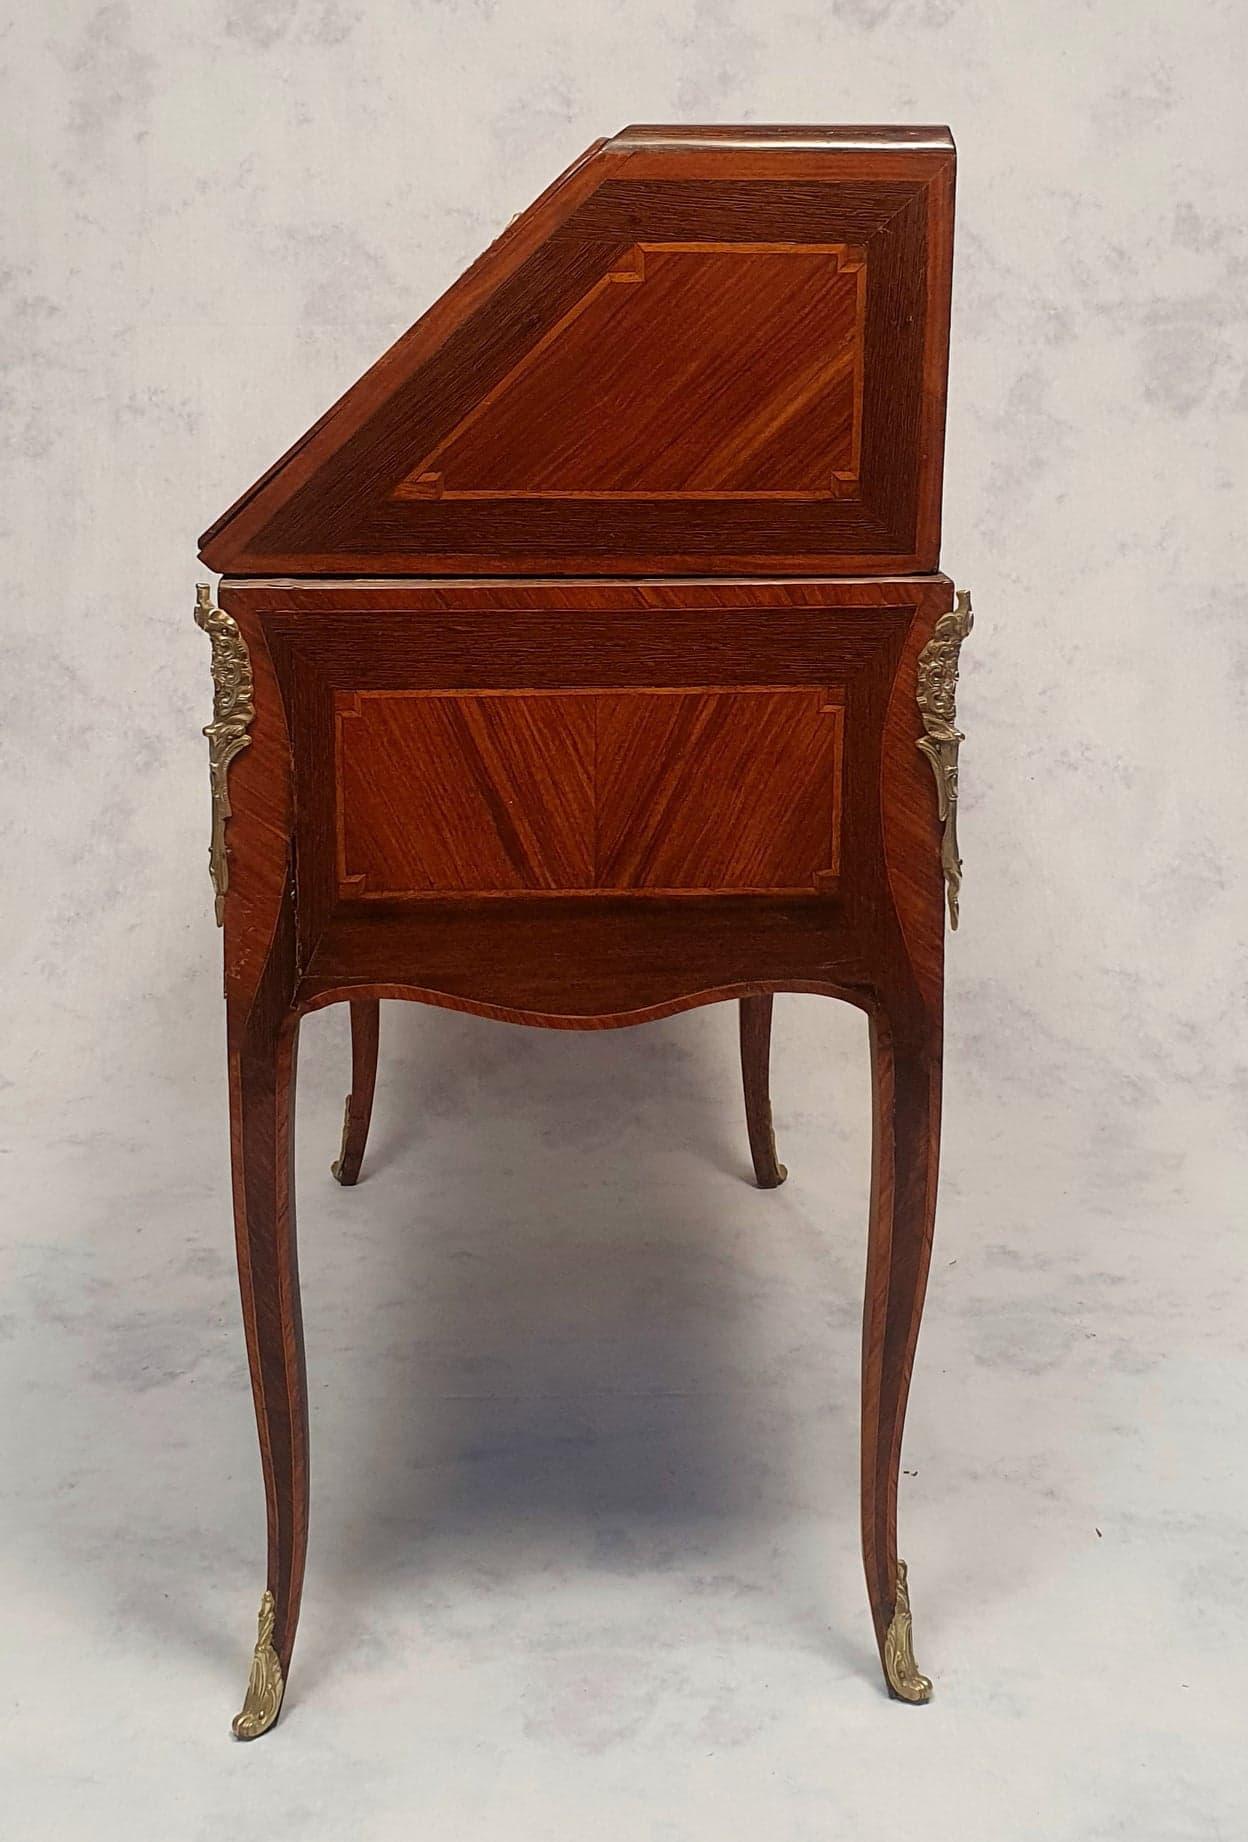 18th Century Secretary Period Transition Louis XV, Louis XVI, Palissander & Rosewood, 18th For Sale